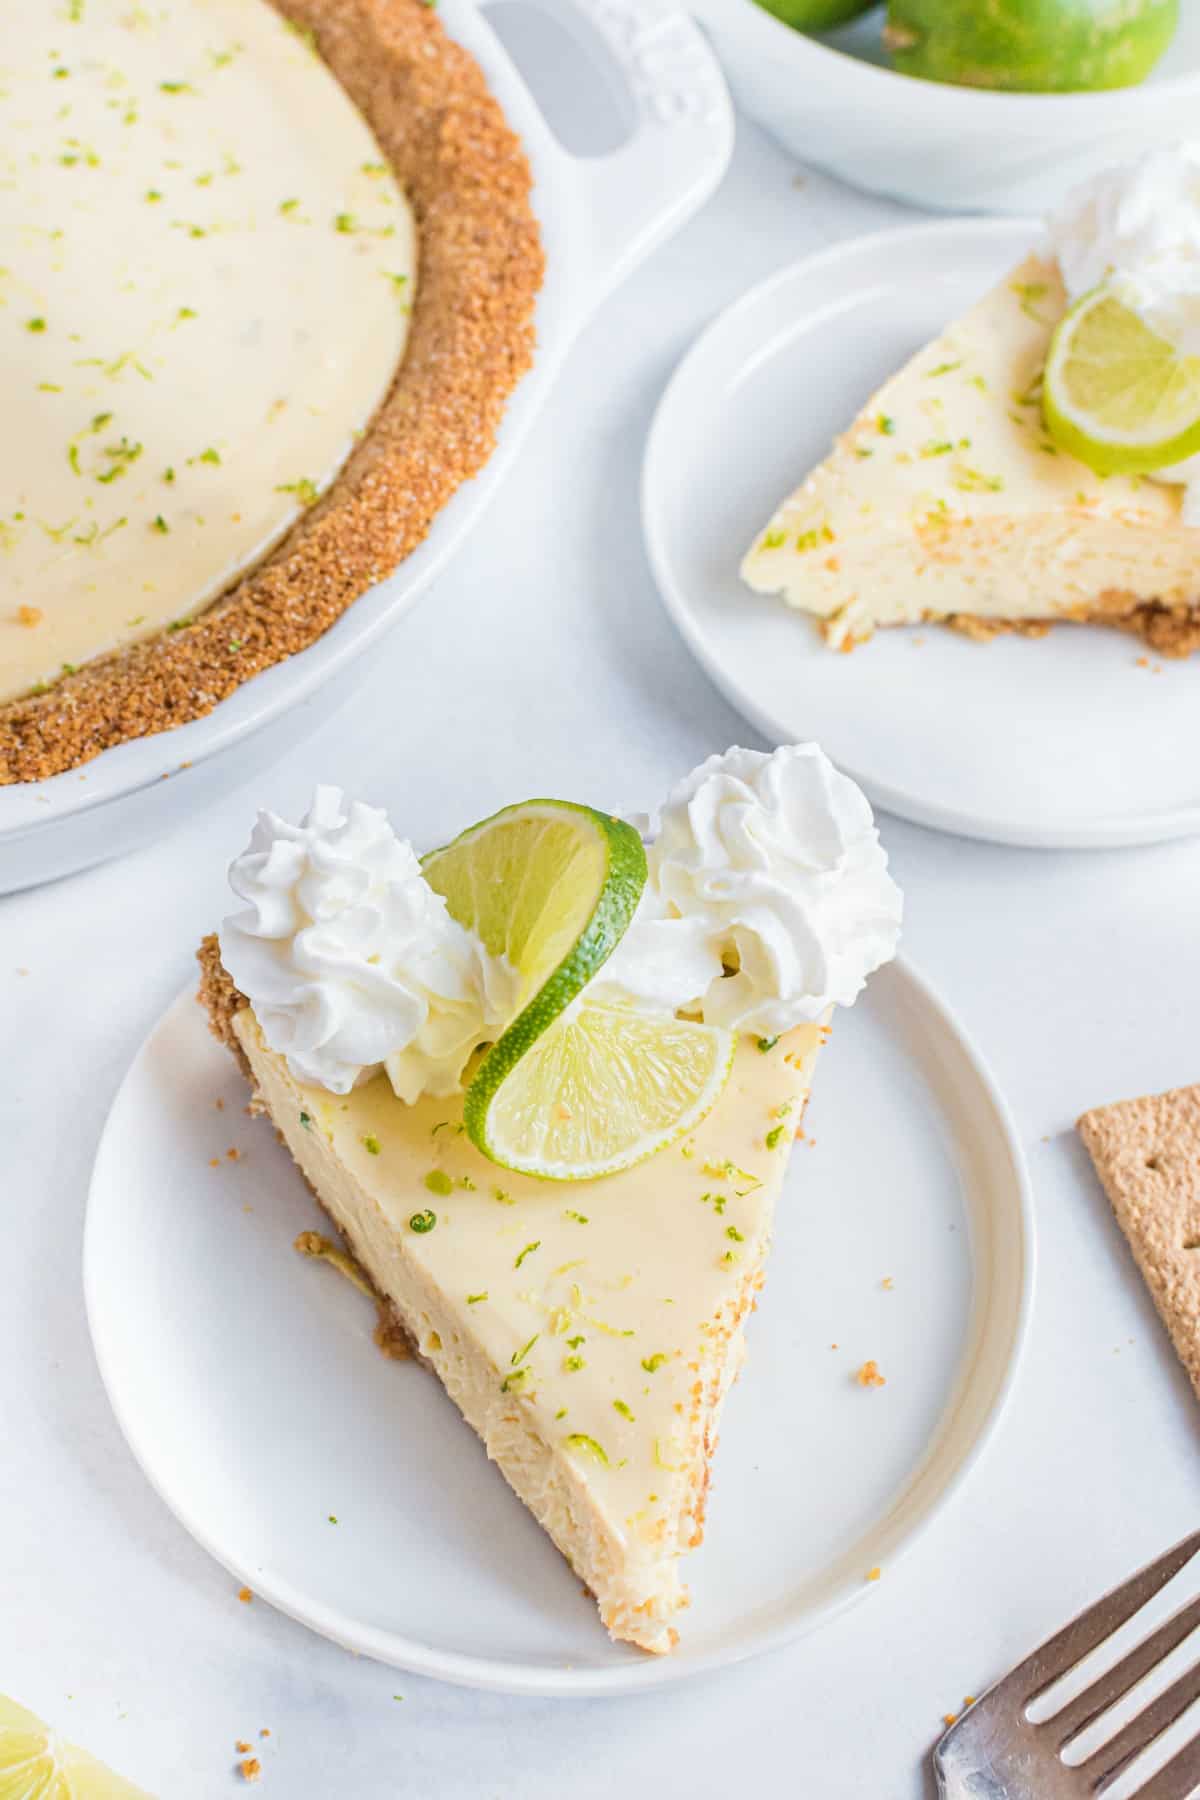 Slice of key lime pie with whipped cream on a white plate.